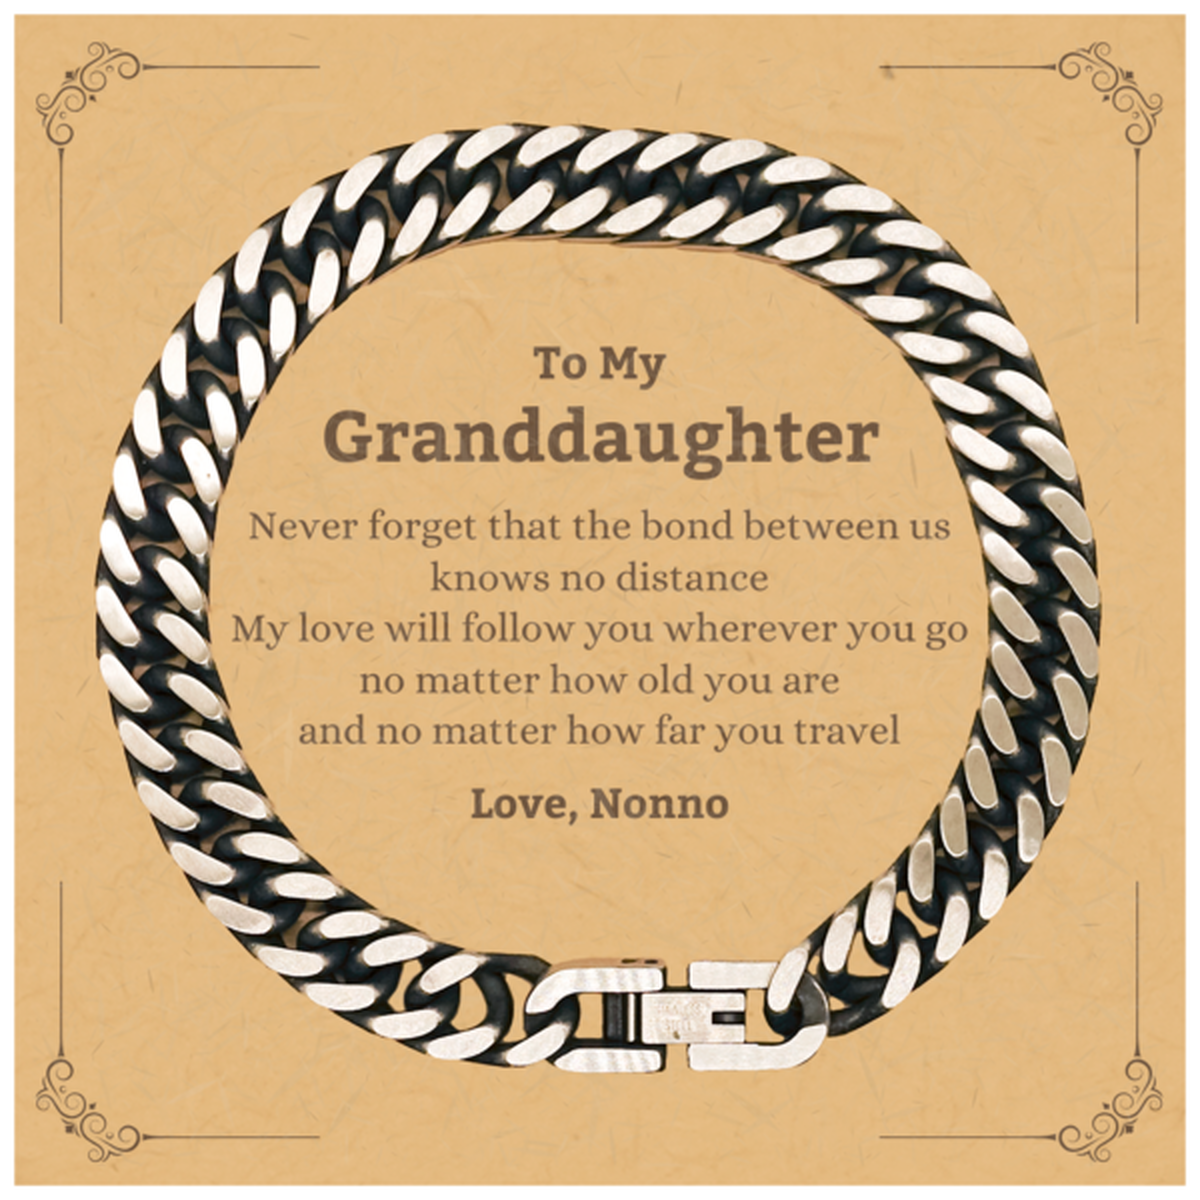 Granddaughter Birthday Gifts from Nonno, Adjustable Cuban Link Chain Bracelet for Granddaughter Christmas Graduation Unique Gifts Granddaughter Never forget that the bond between us knows no distance. Love, Nonno